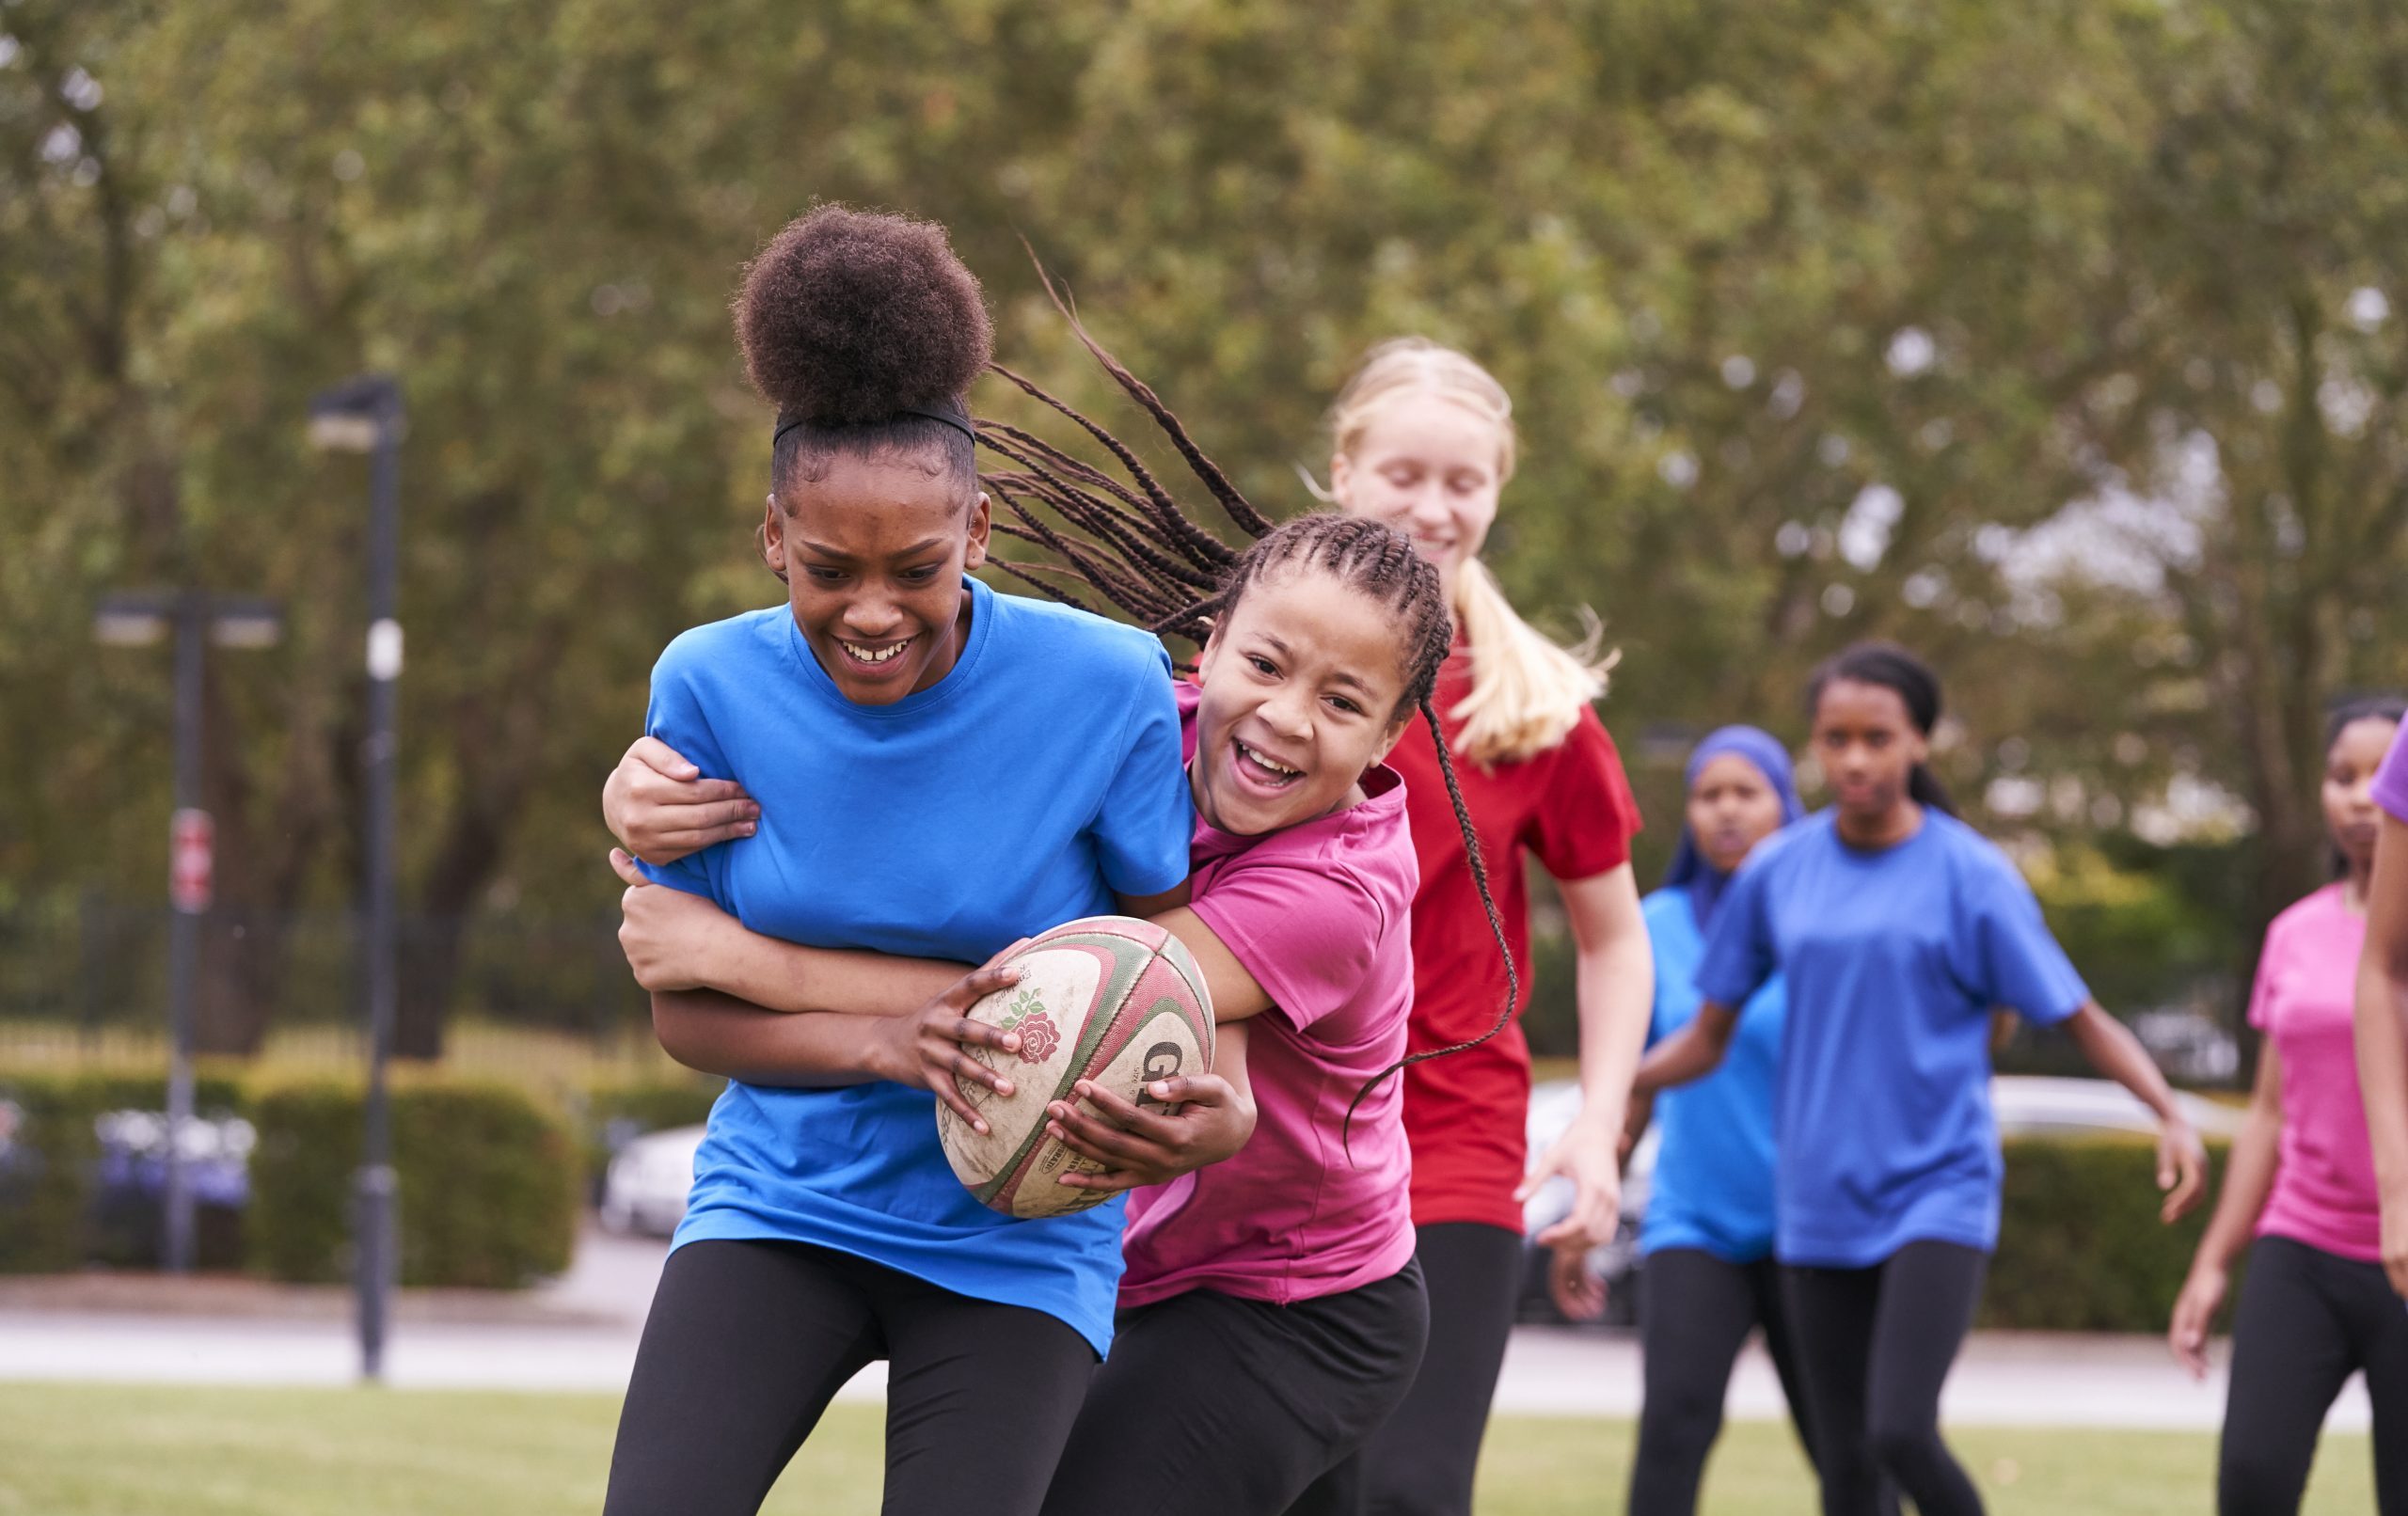 A group of high school girls playing rugby, two black girls tackling with smiles on their faces